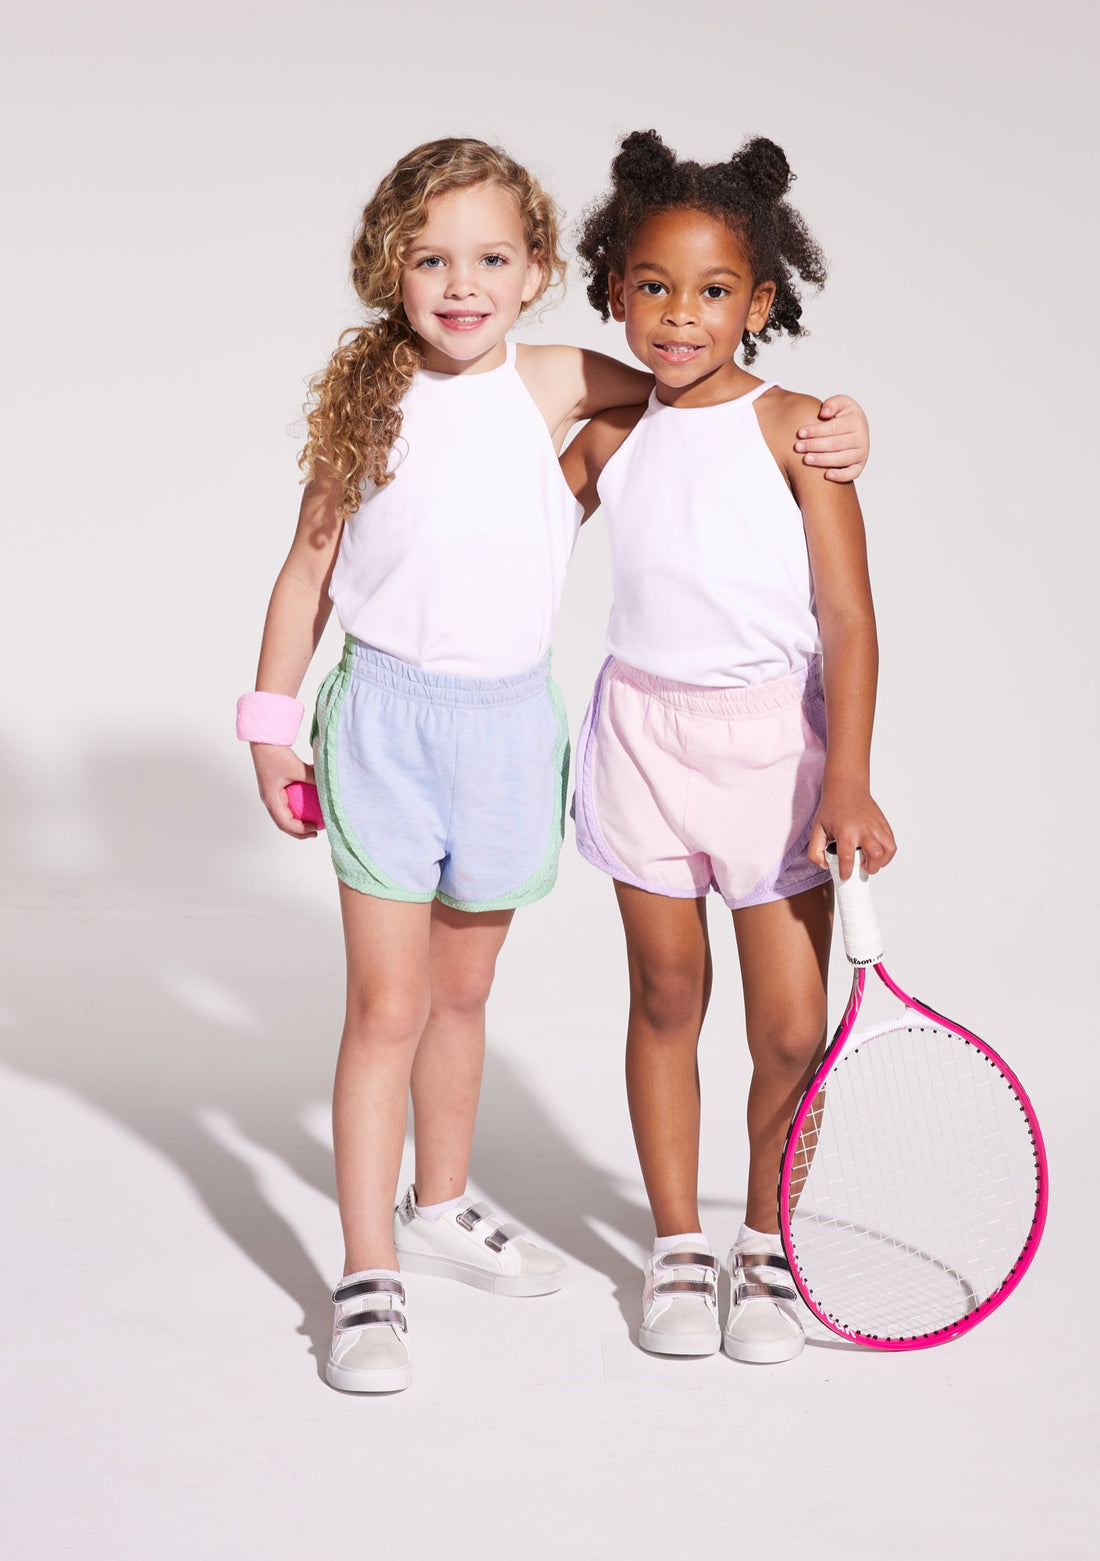 BISBY girls in our White Halter Top which pairs back perfectly with our track shorts!